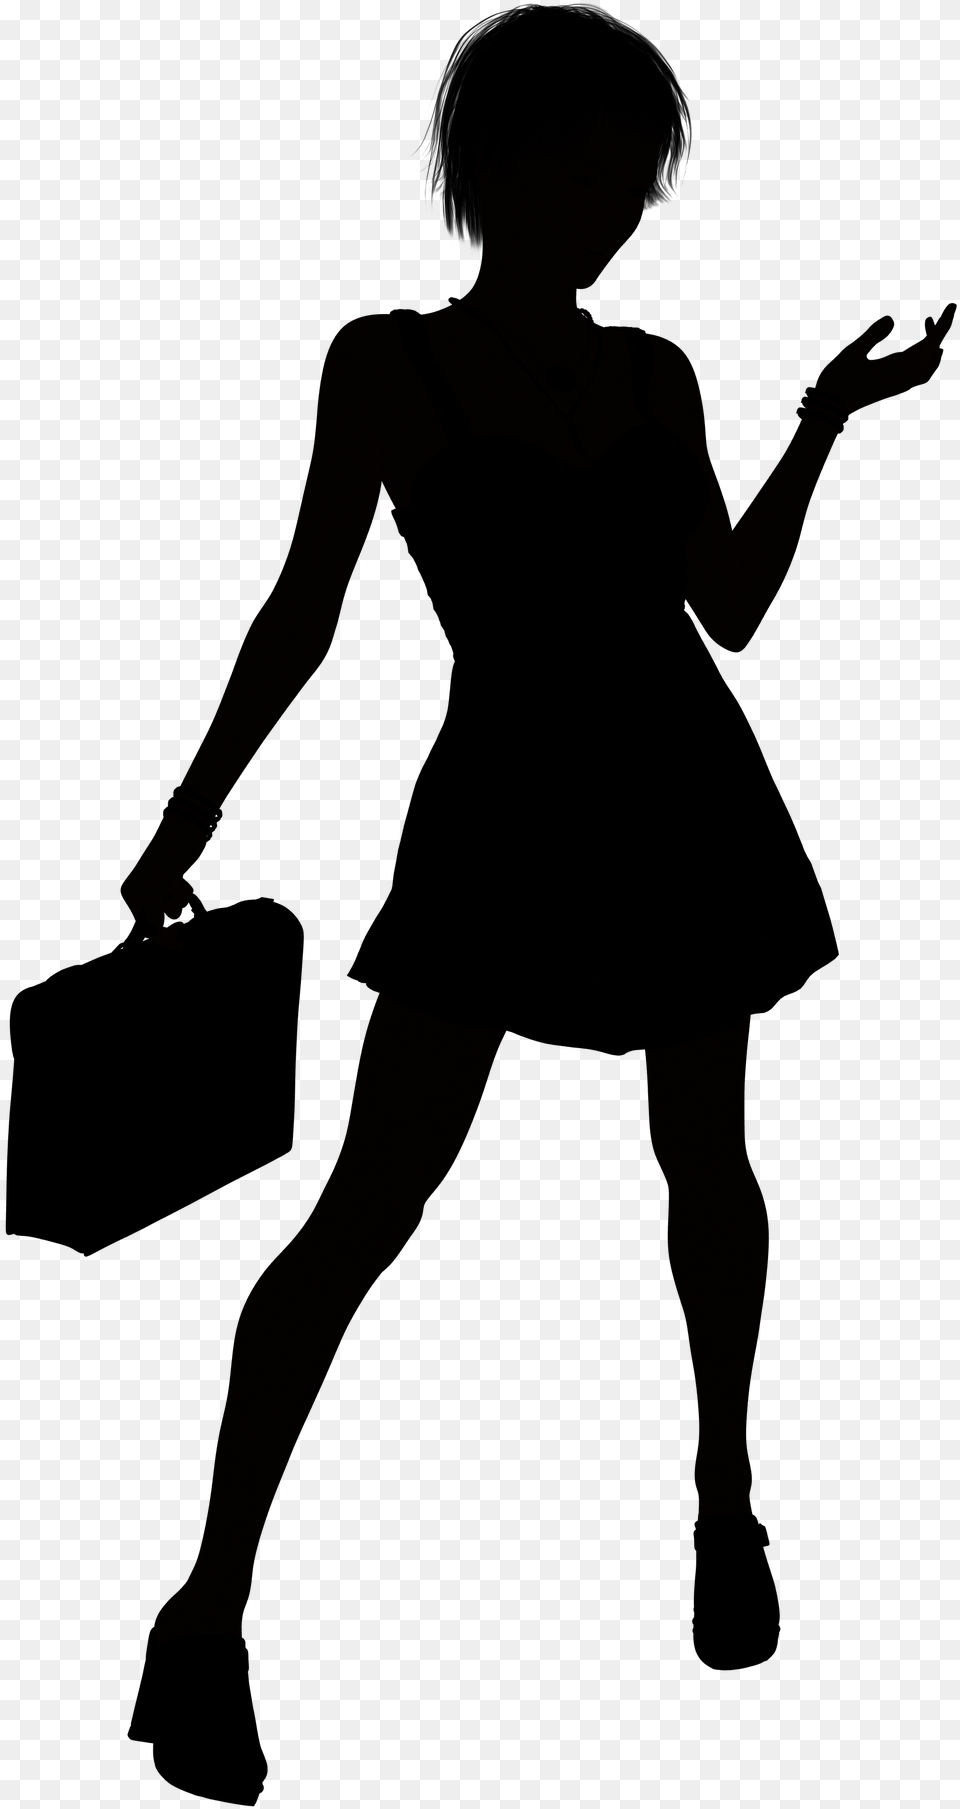 Lit Up January39s Prompt Woman Carrying Purse Silhouette, Dancing, Leisure Activities, Person, Dance Pose Png Image